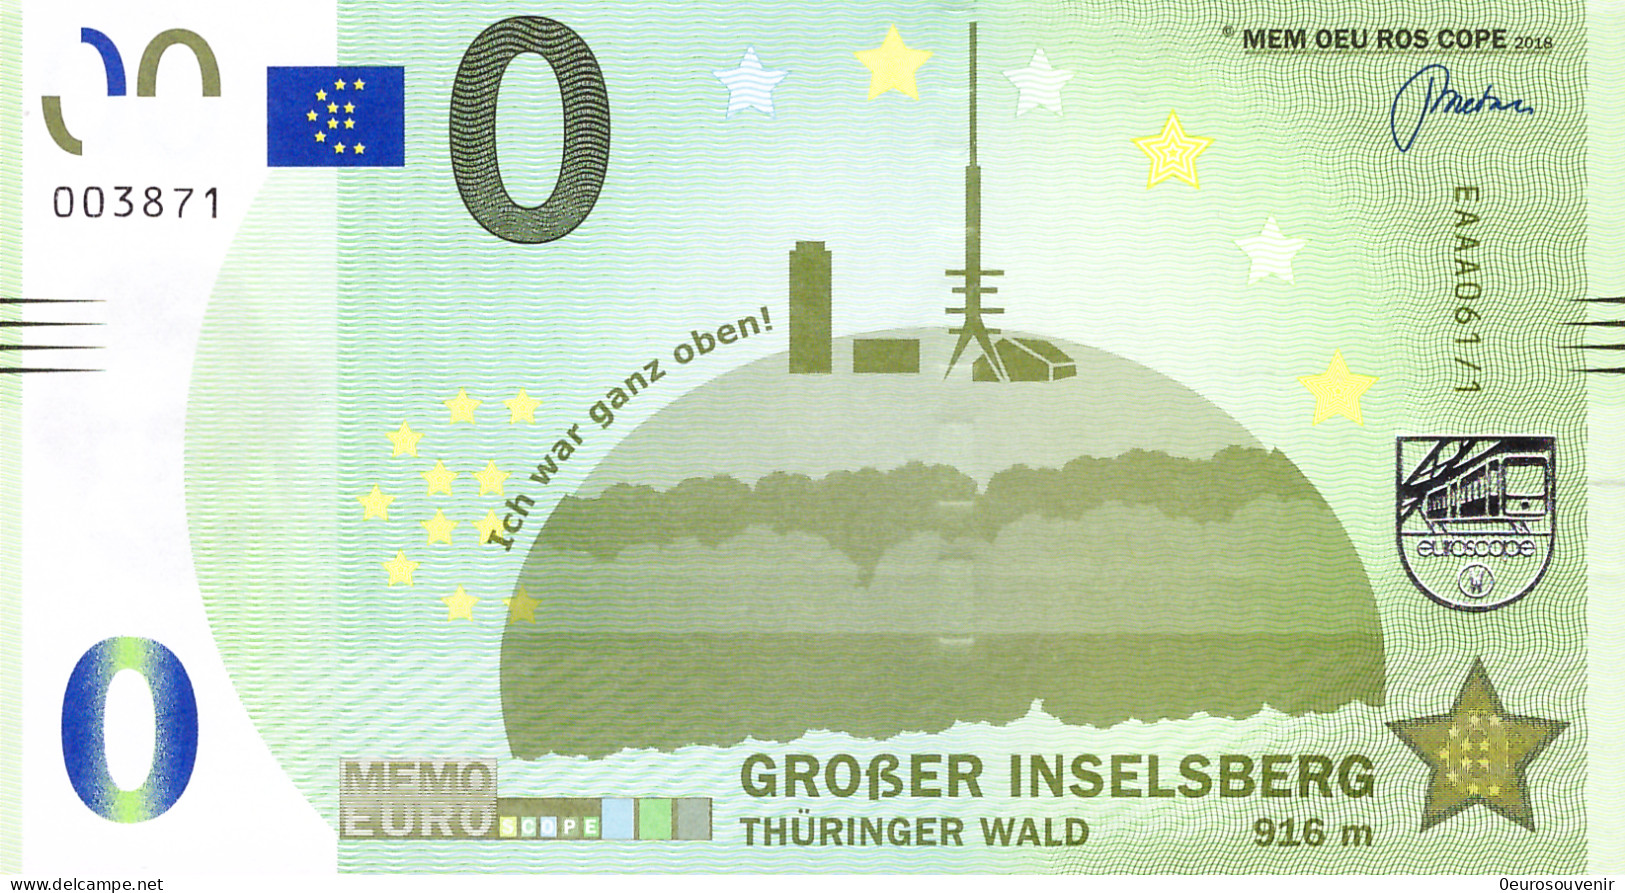 MEMO 0-Euro EAAA 061/1 GROßER INSELBERG THÜRINGER WALD 916m - Private Proofs / Unofficial